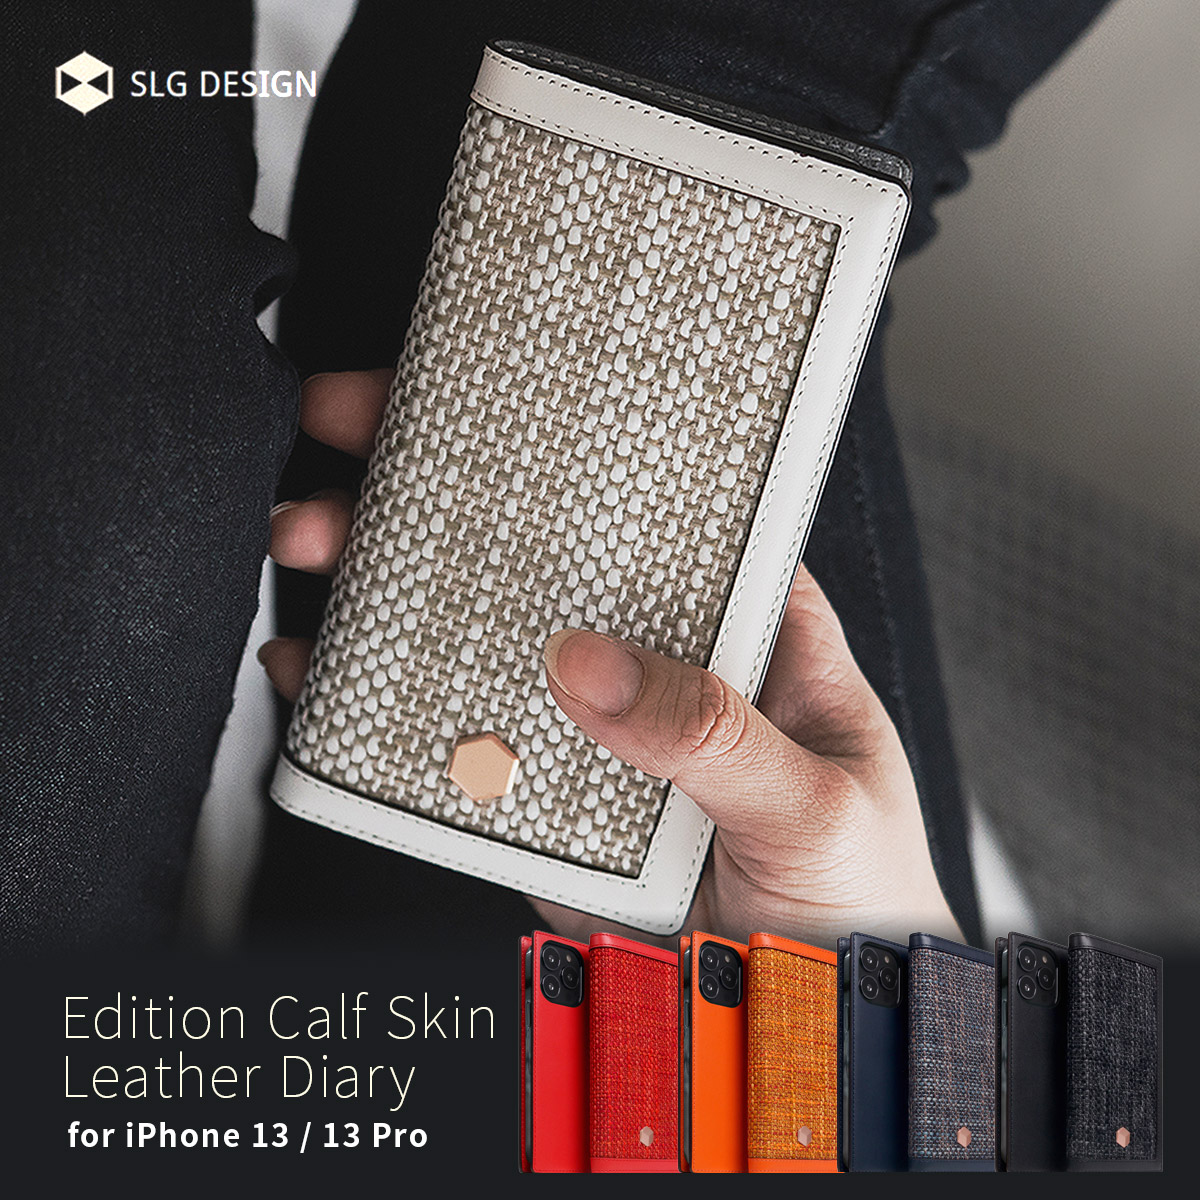 【iPhone 13 / 13 Pro】Edition Calf Skin Leather Diary